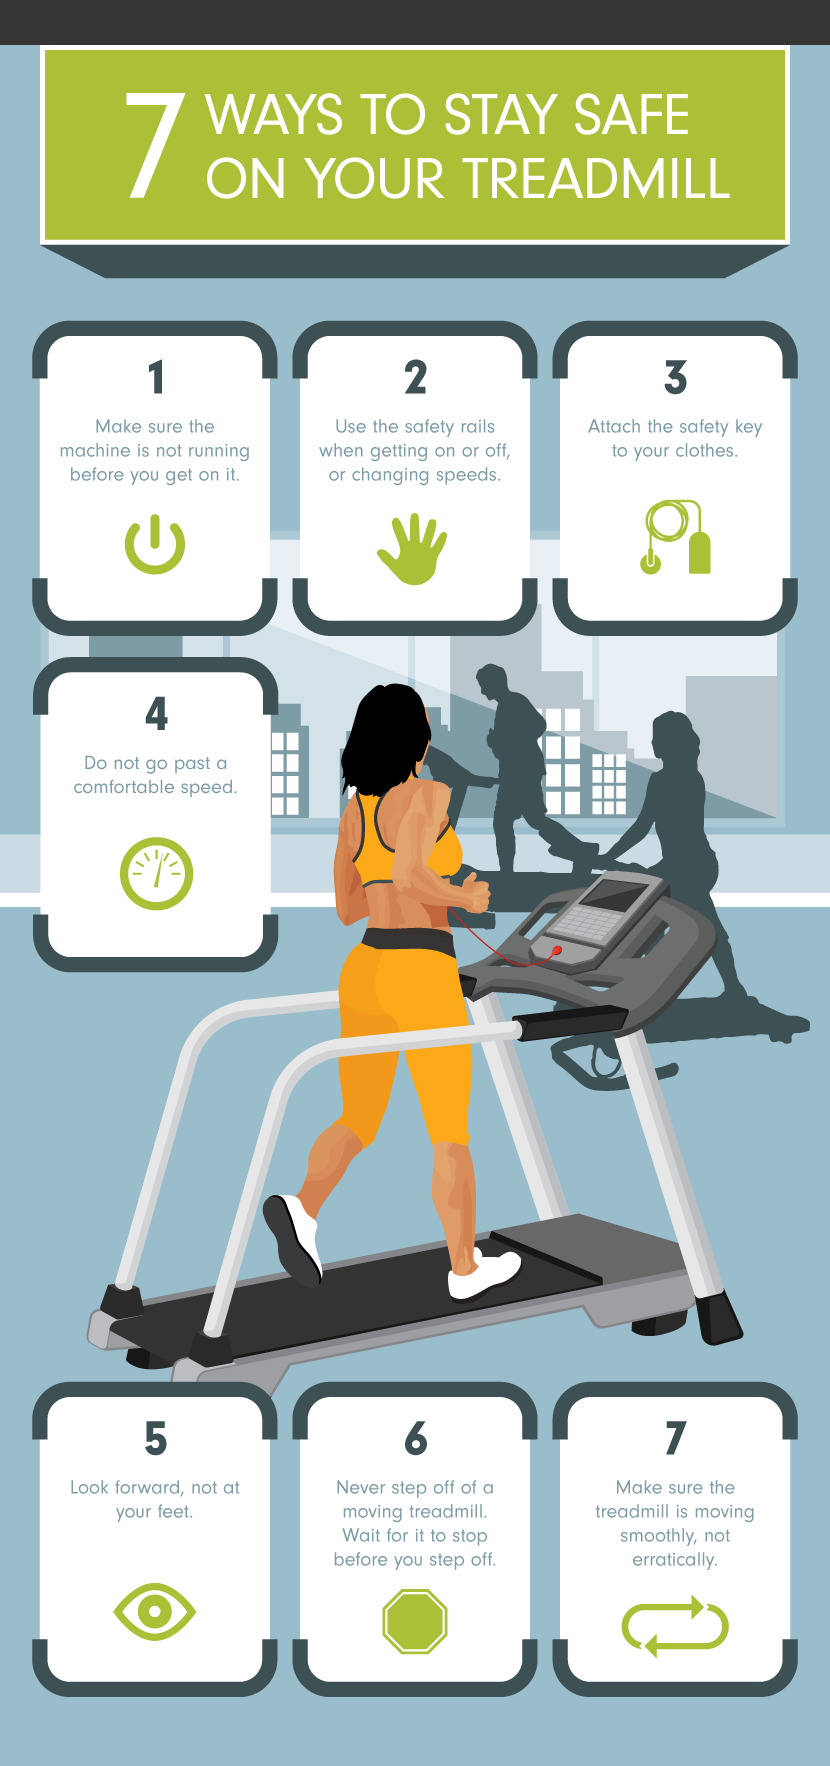 7 Ways to Stay Safe - Treadmill Maintenance and Repair